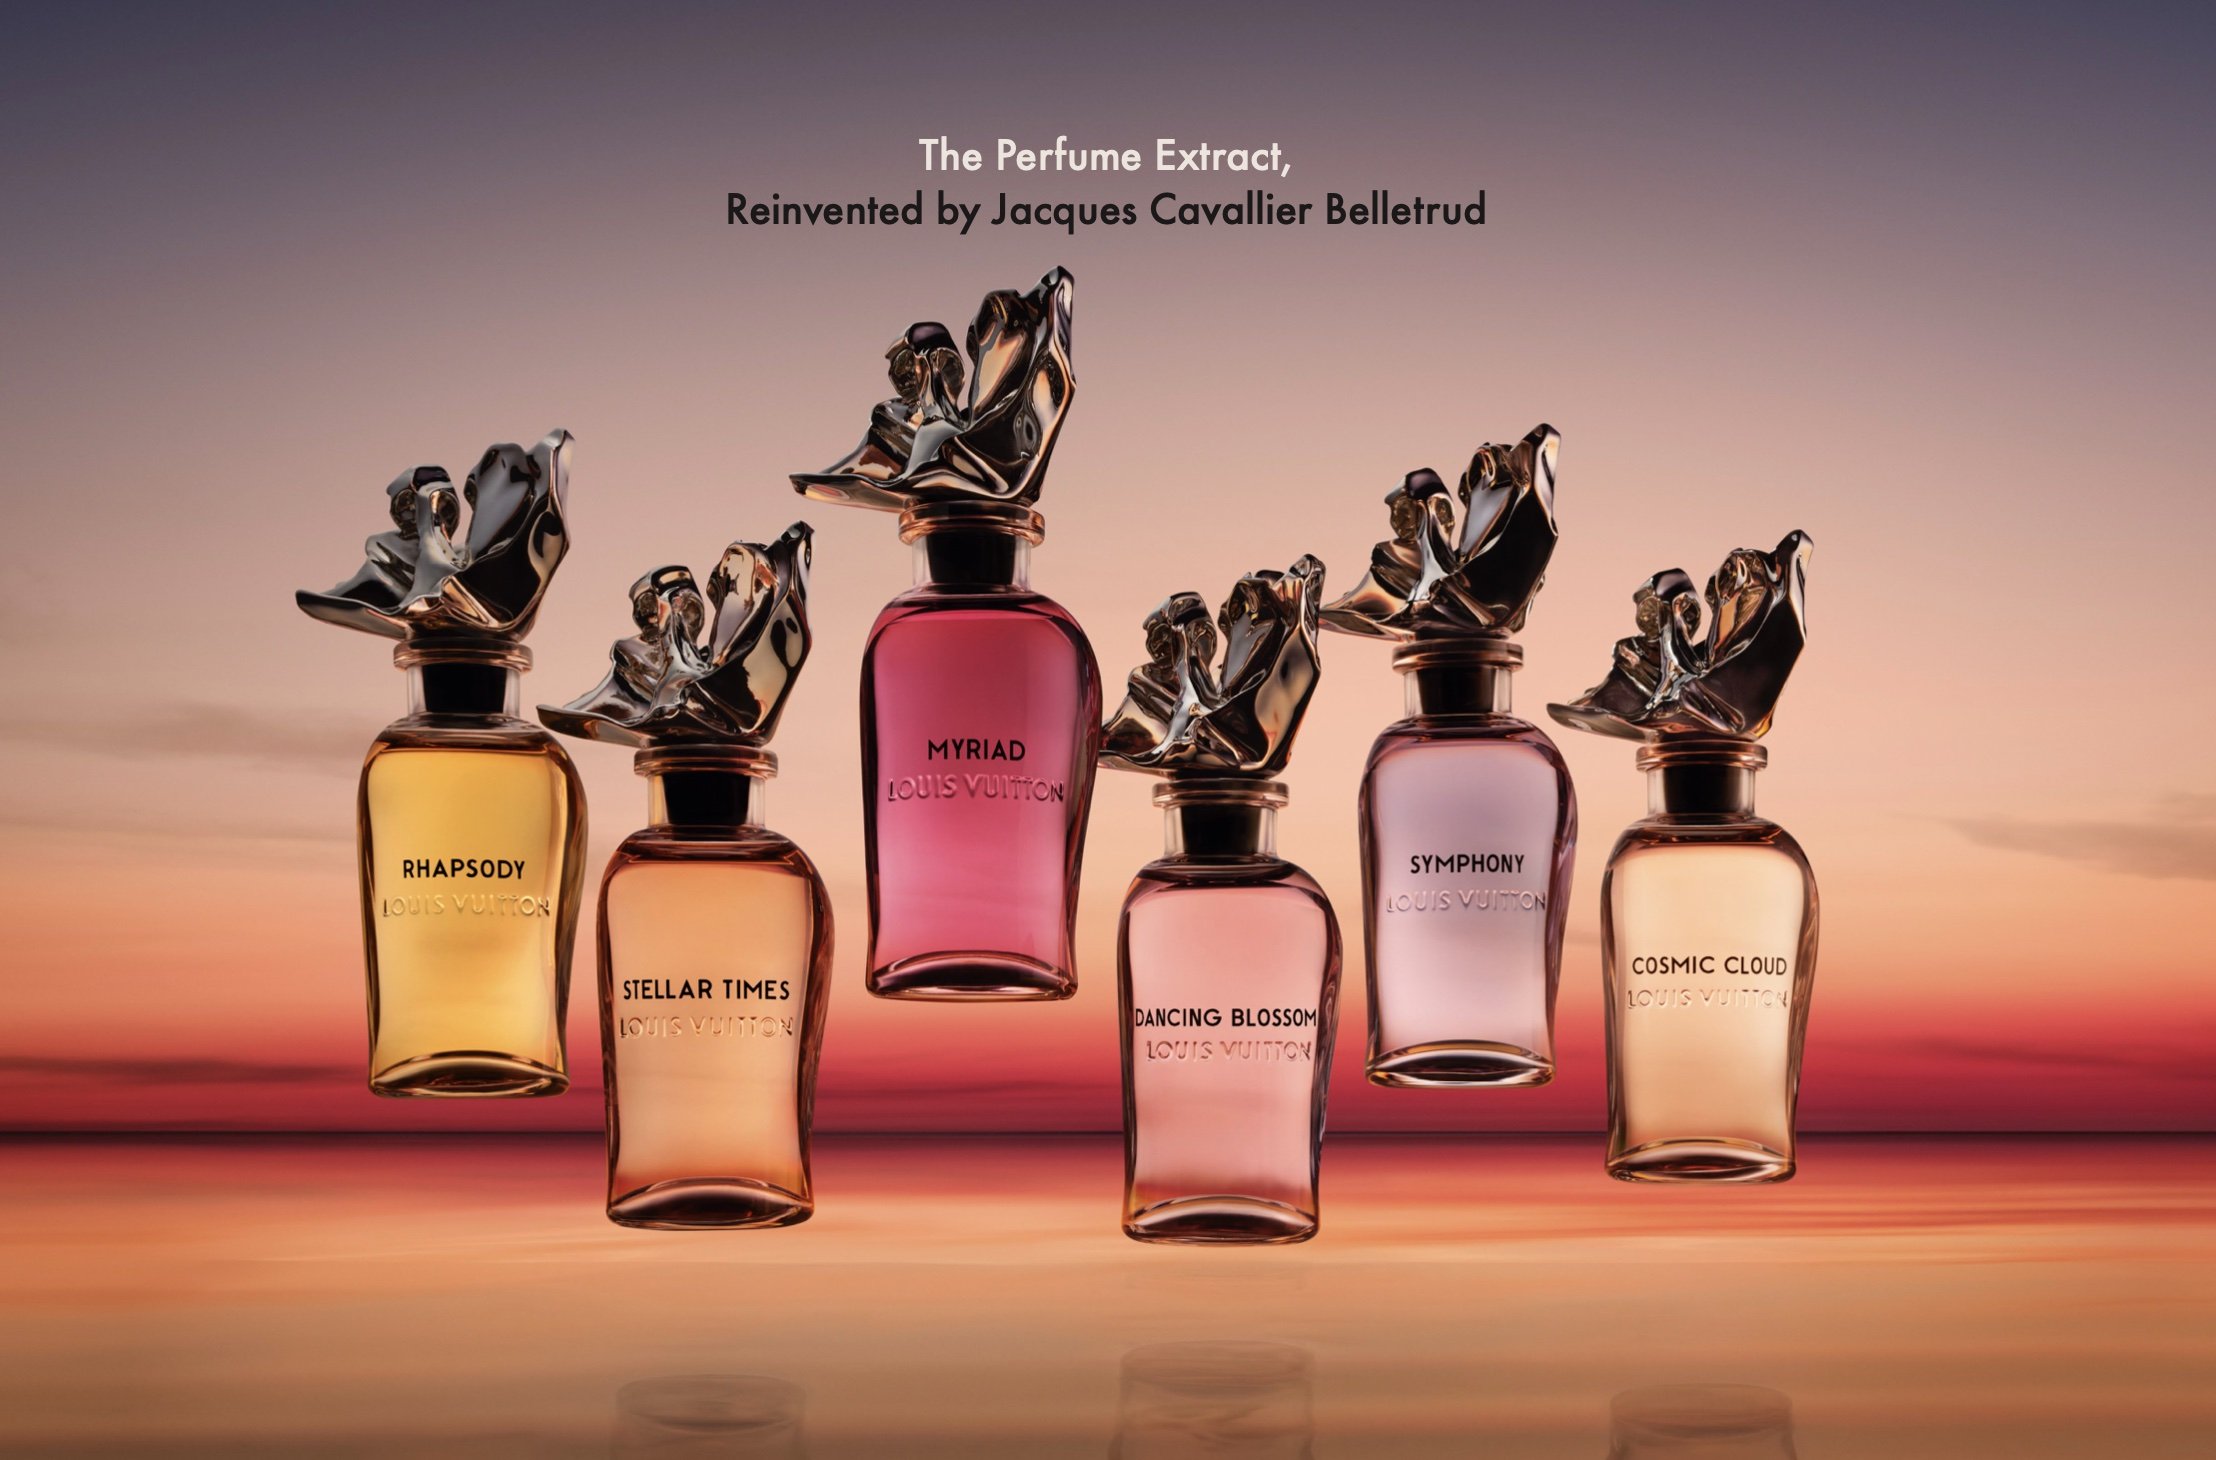 myriad by louis vuitton a new dialogue between perfume and